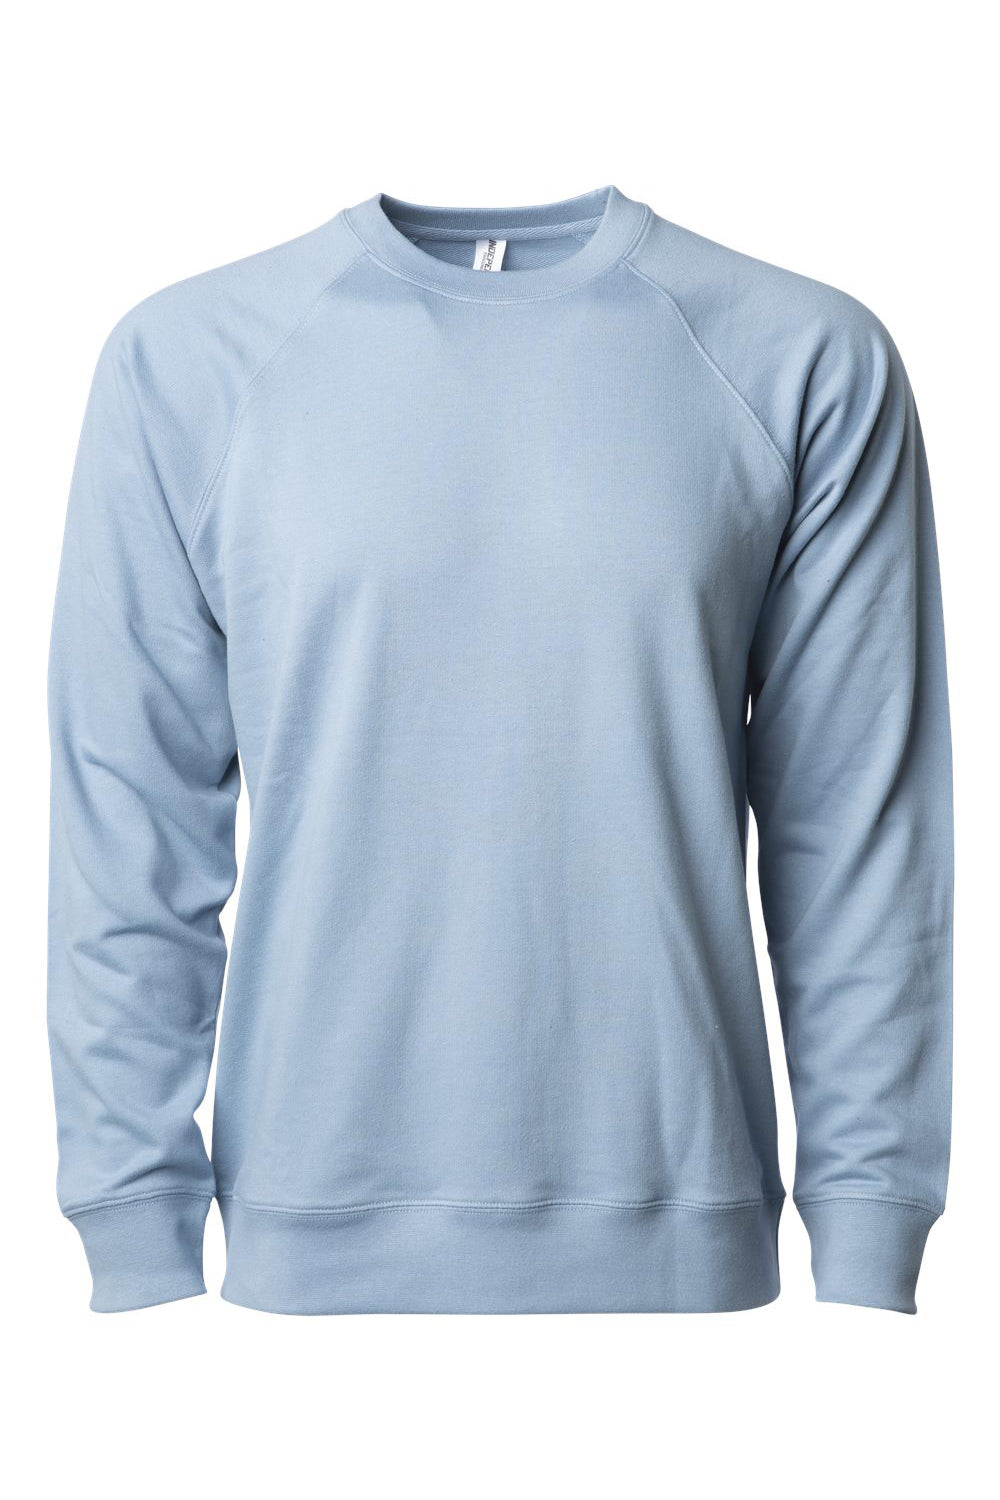 Independent Trading Co. SS1000C Mens Icon Loopback Terry Crewneck Sweatshirt Misty Blue Flat Front